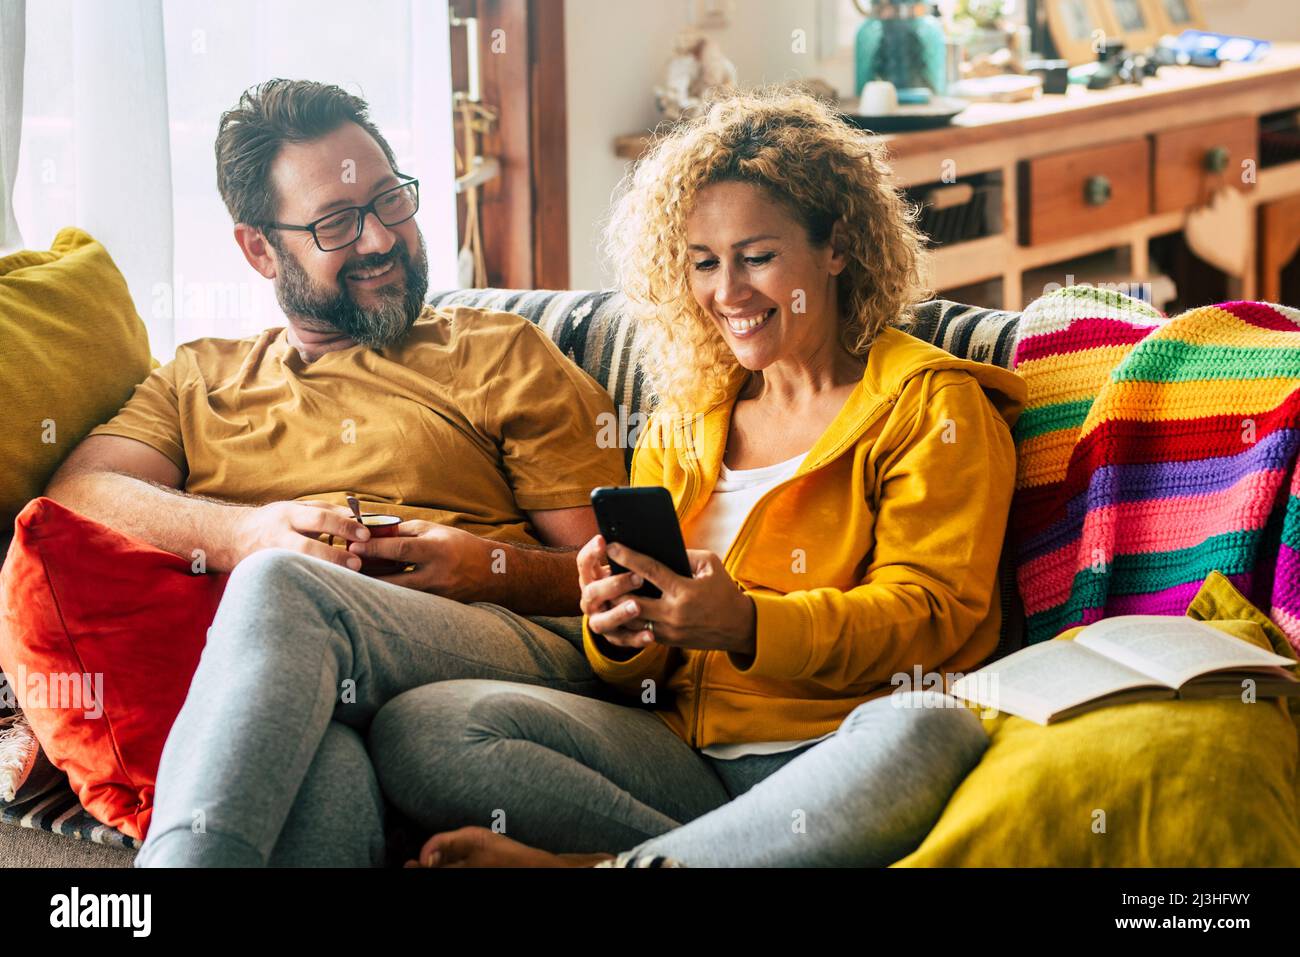 Adult couple at home enjoy mobile phone activity sitting on the sofa and smiling. Colorful house interior and cheerful man and woman people having morning breakfast with technology Stock Photo